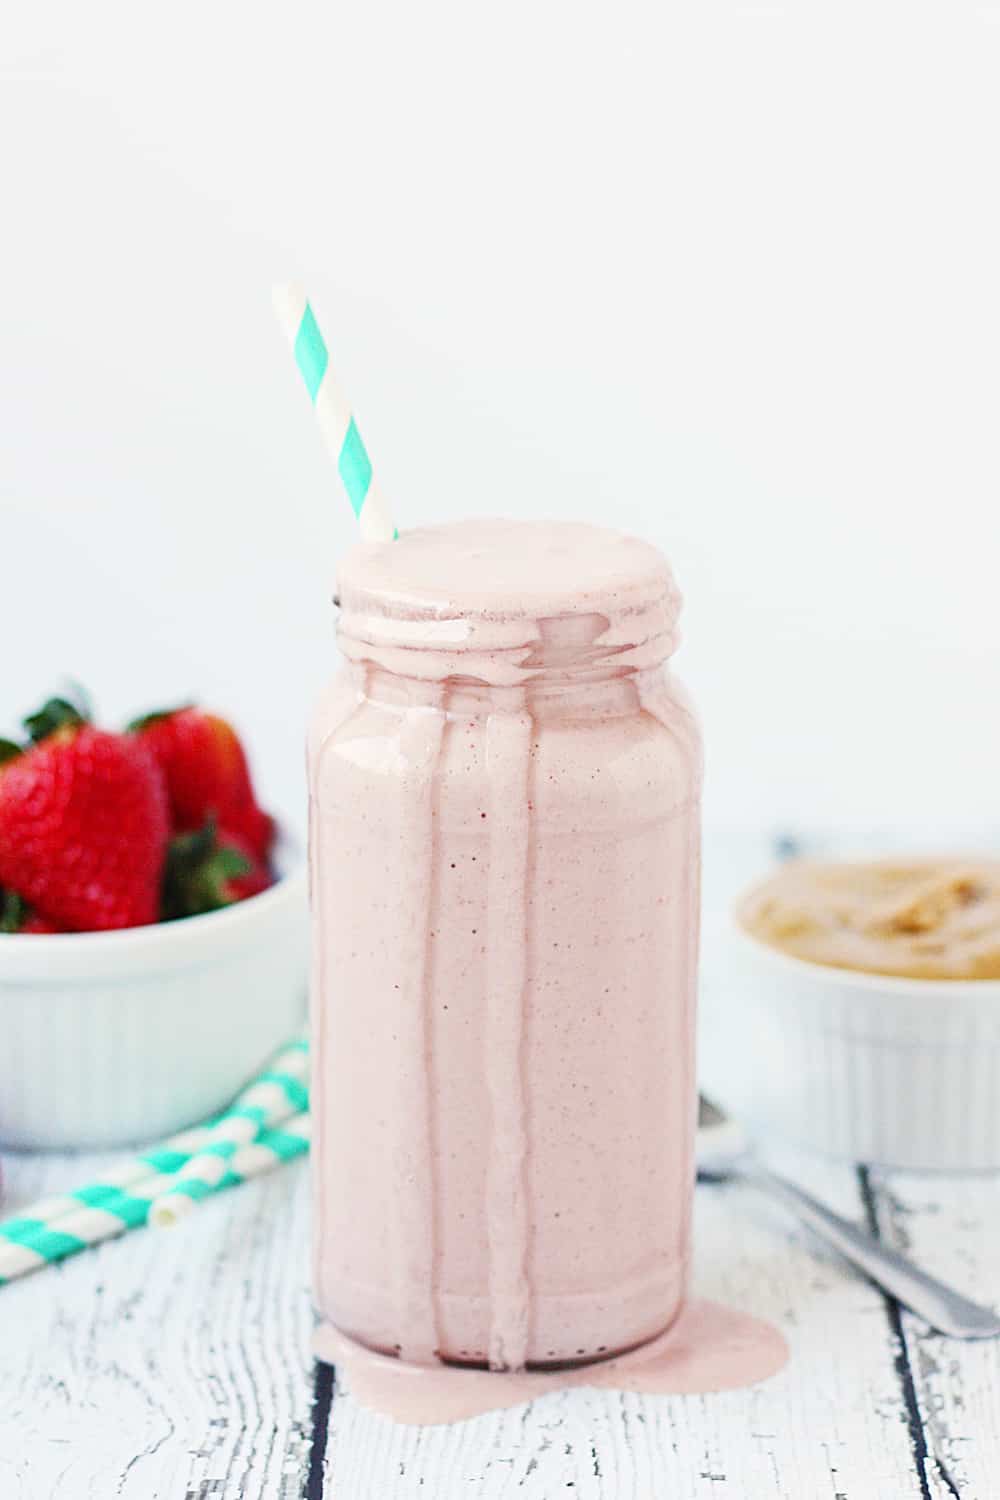 3-Ingredient Peanut Butter & Jelly Smoothie -- This 3-ingredient peanut butter & jelly smoothie is not only packed with that classic PB&J flavor but also 9 grams of protein and 6 grams of fiber. Oh, and it's totally dairy-free! | halfscratched.com